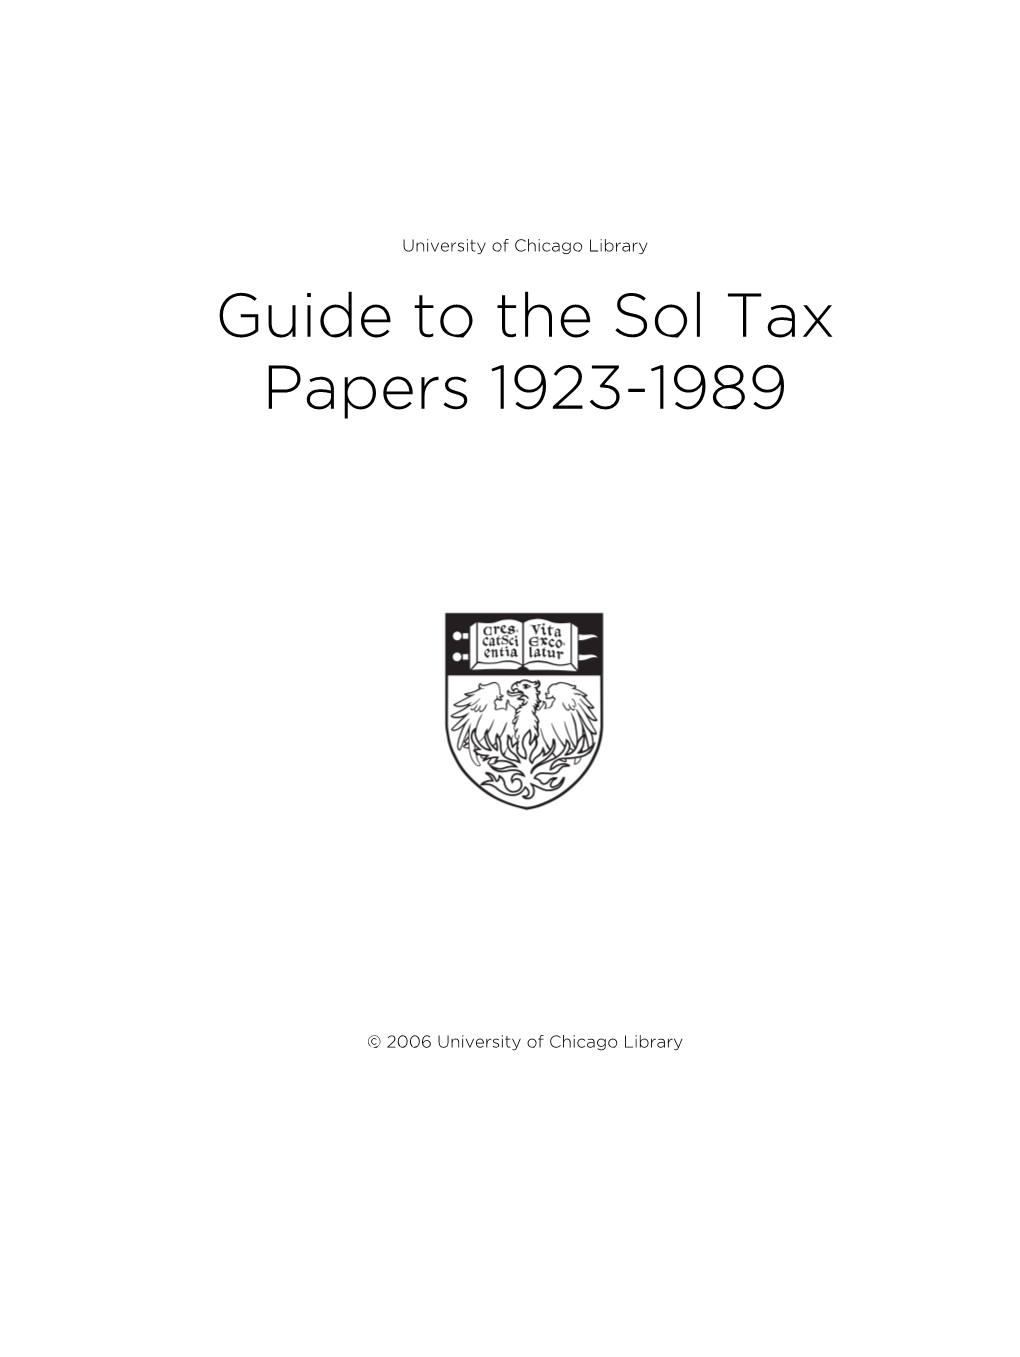 Guide to the Sol Tax Papers 1923-1989